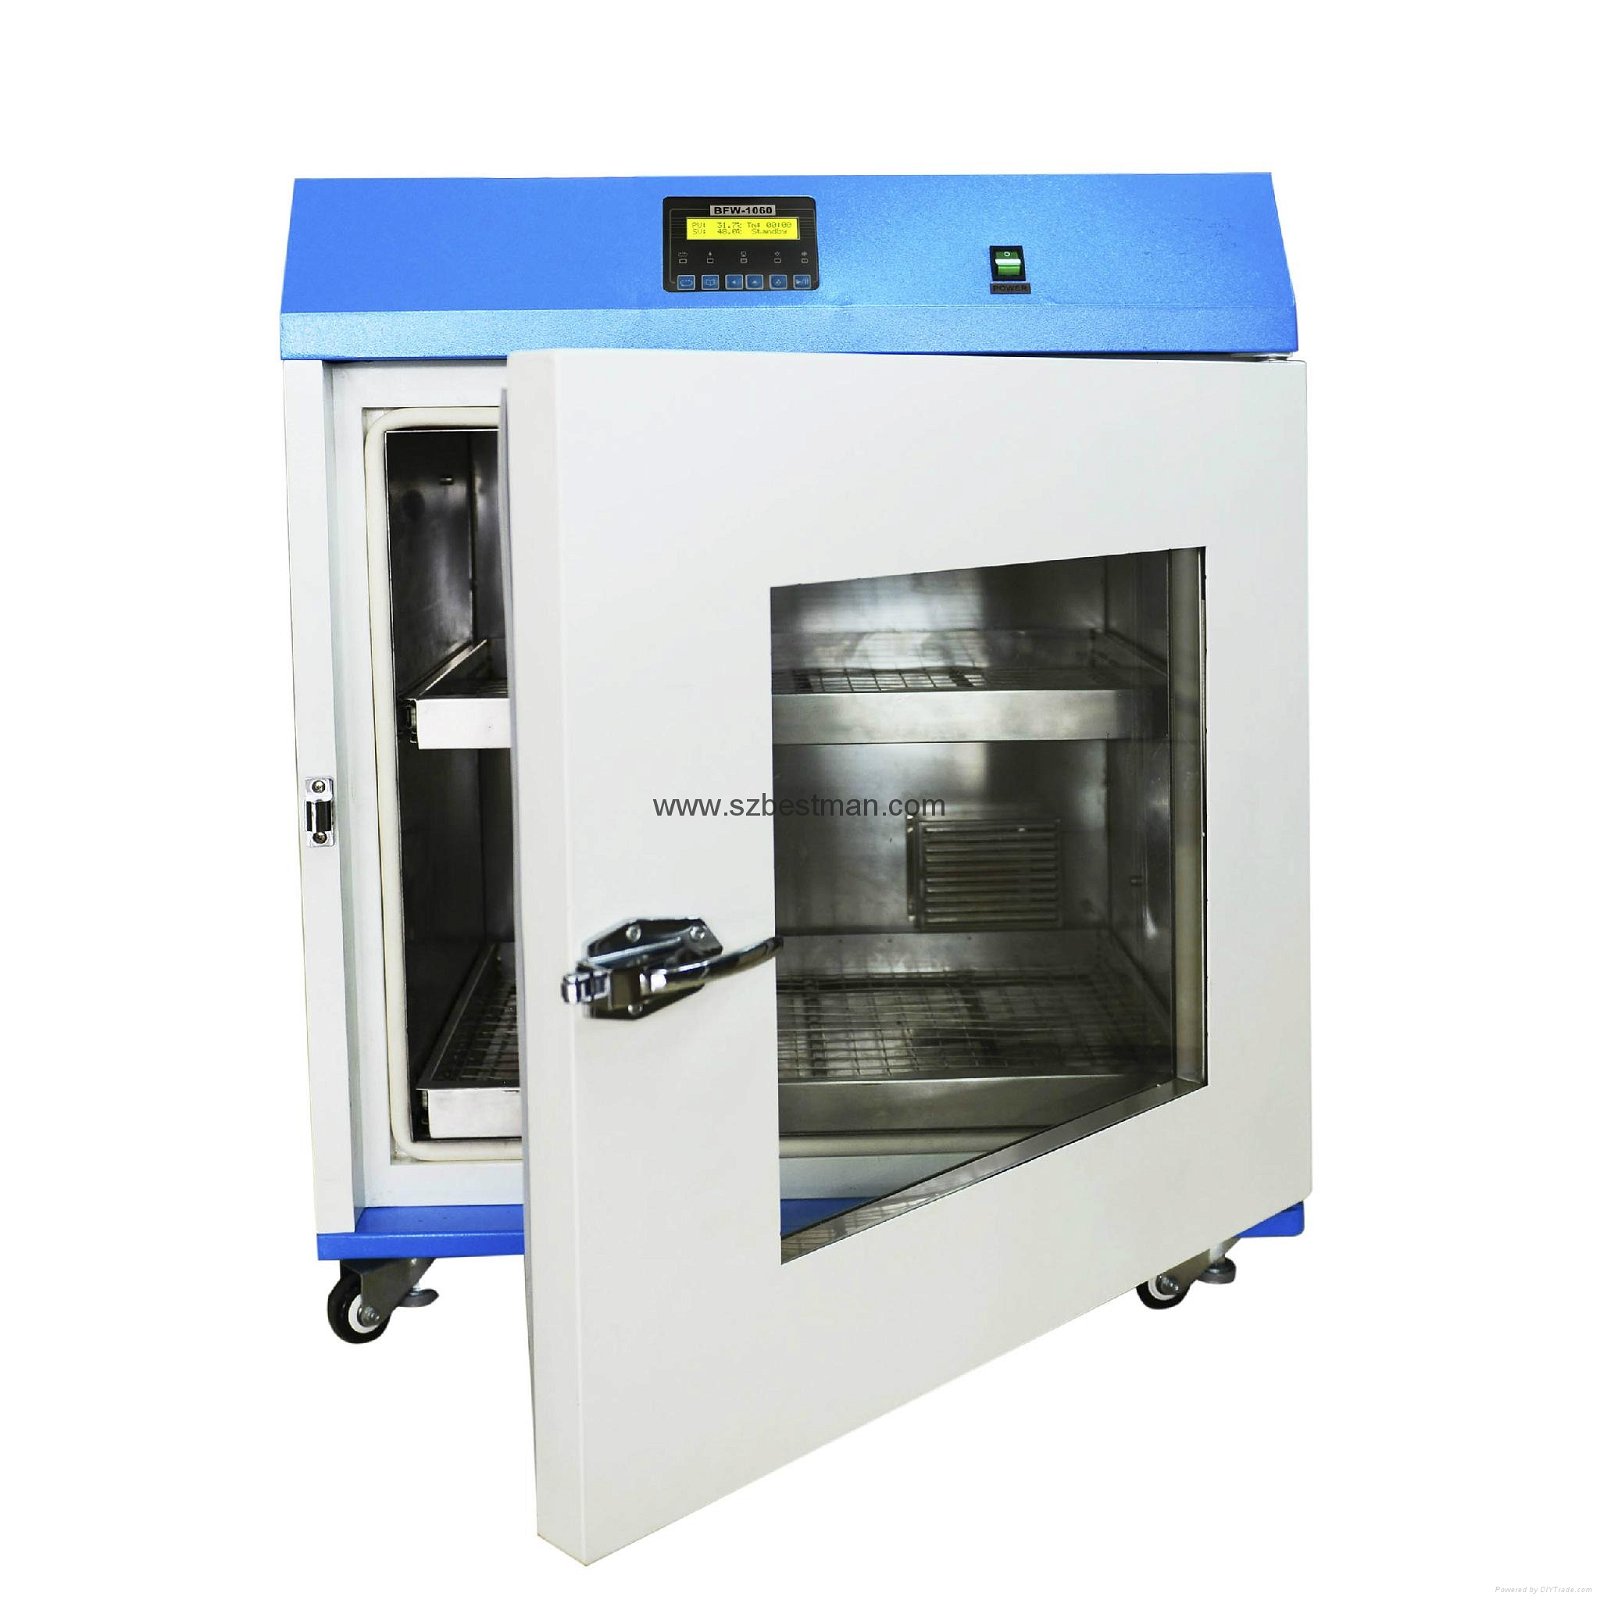 Bestman New Edical Fluid Warming Cabinet Ce Appreoved Bfw1060